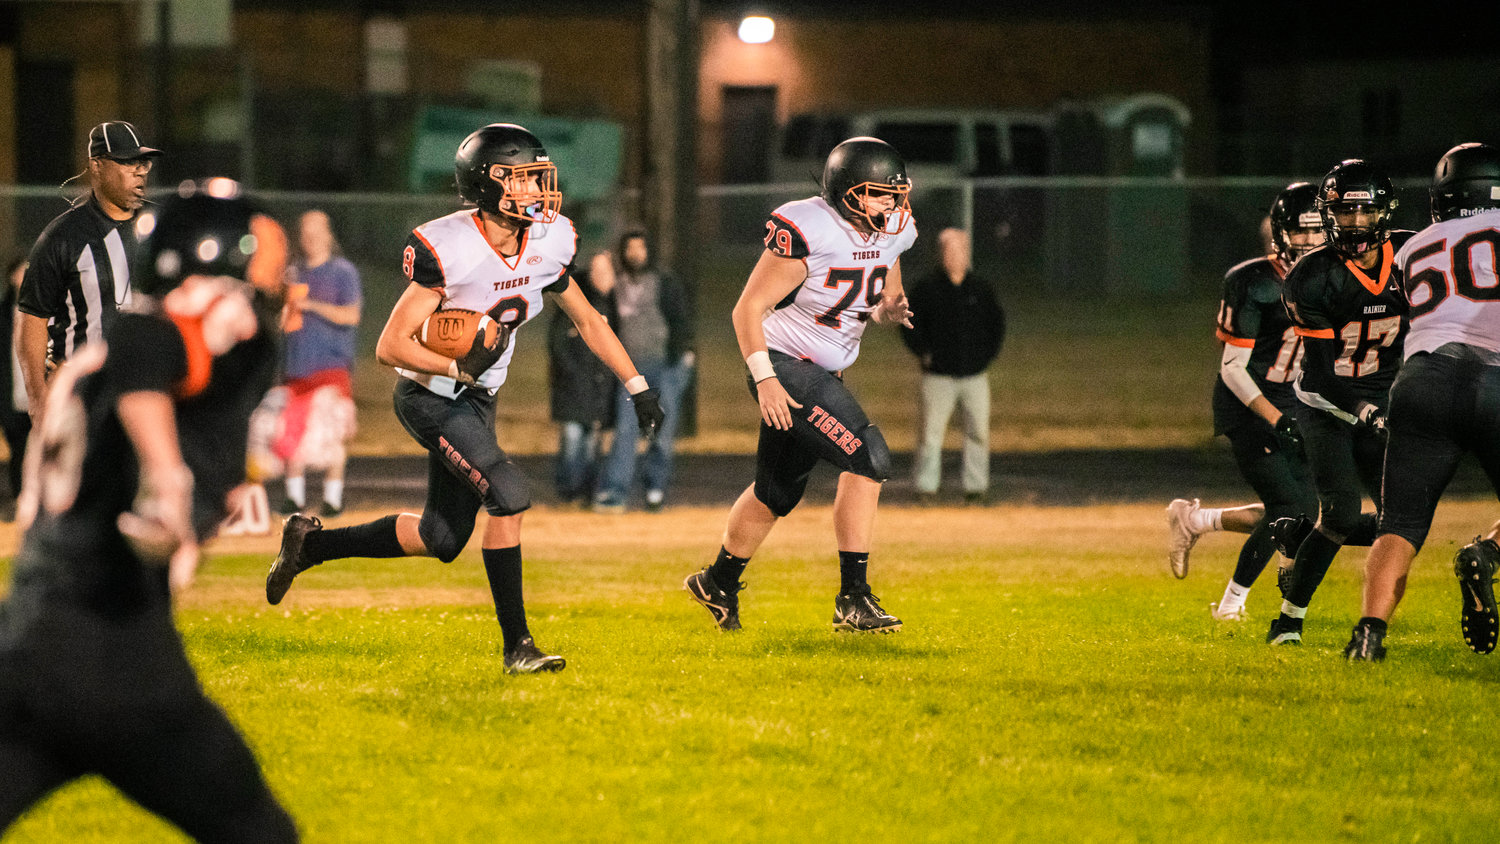 Napavine junior James Grose (8) runs with the football during a game Friday night in Rainier.